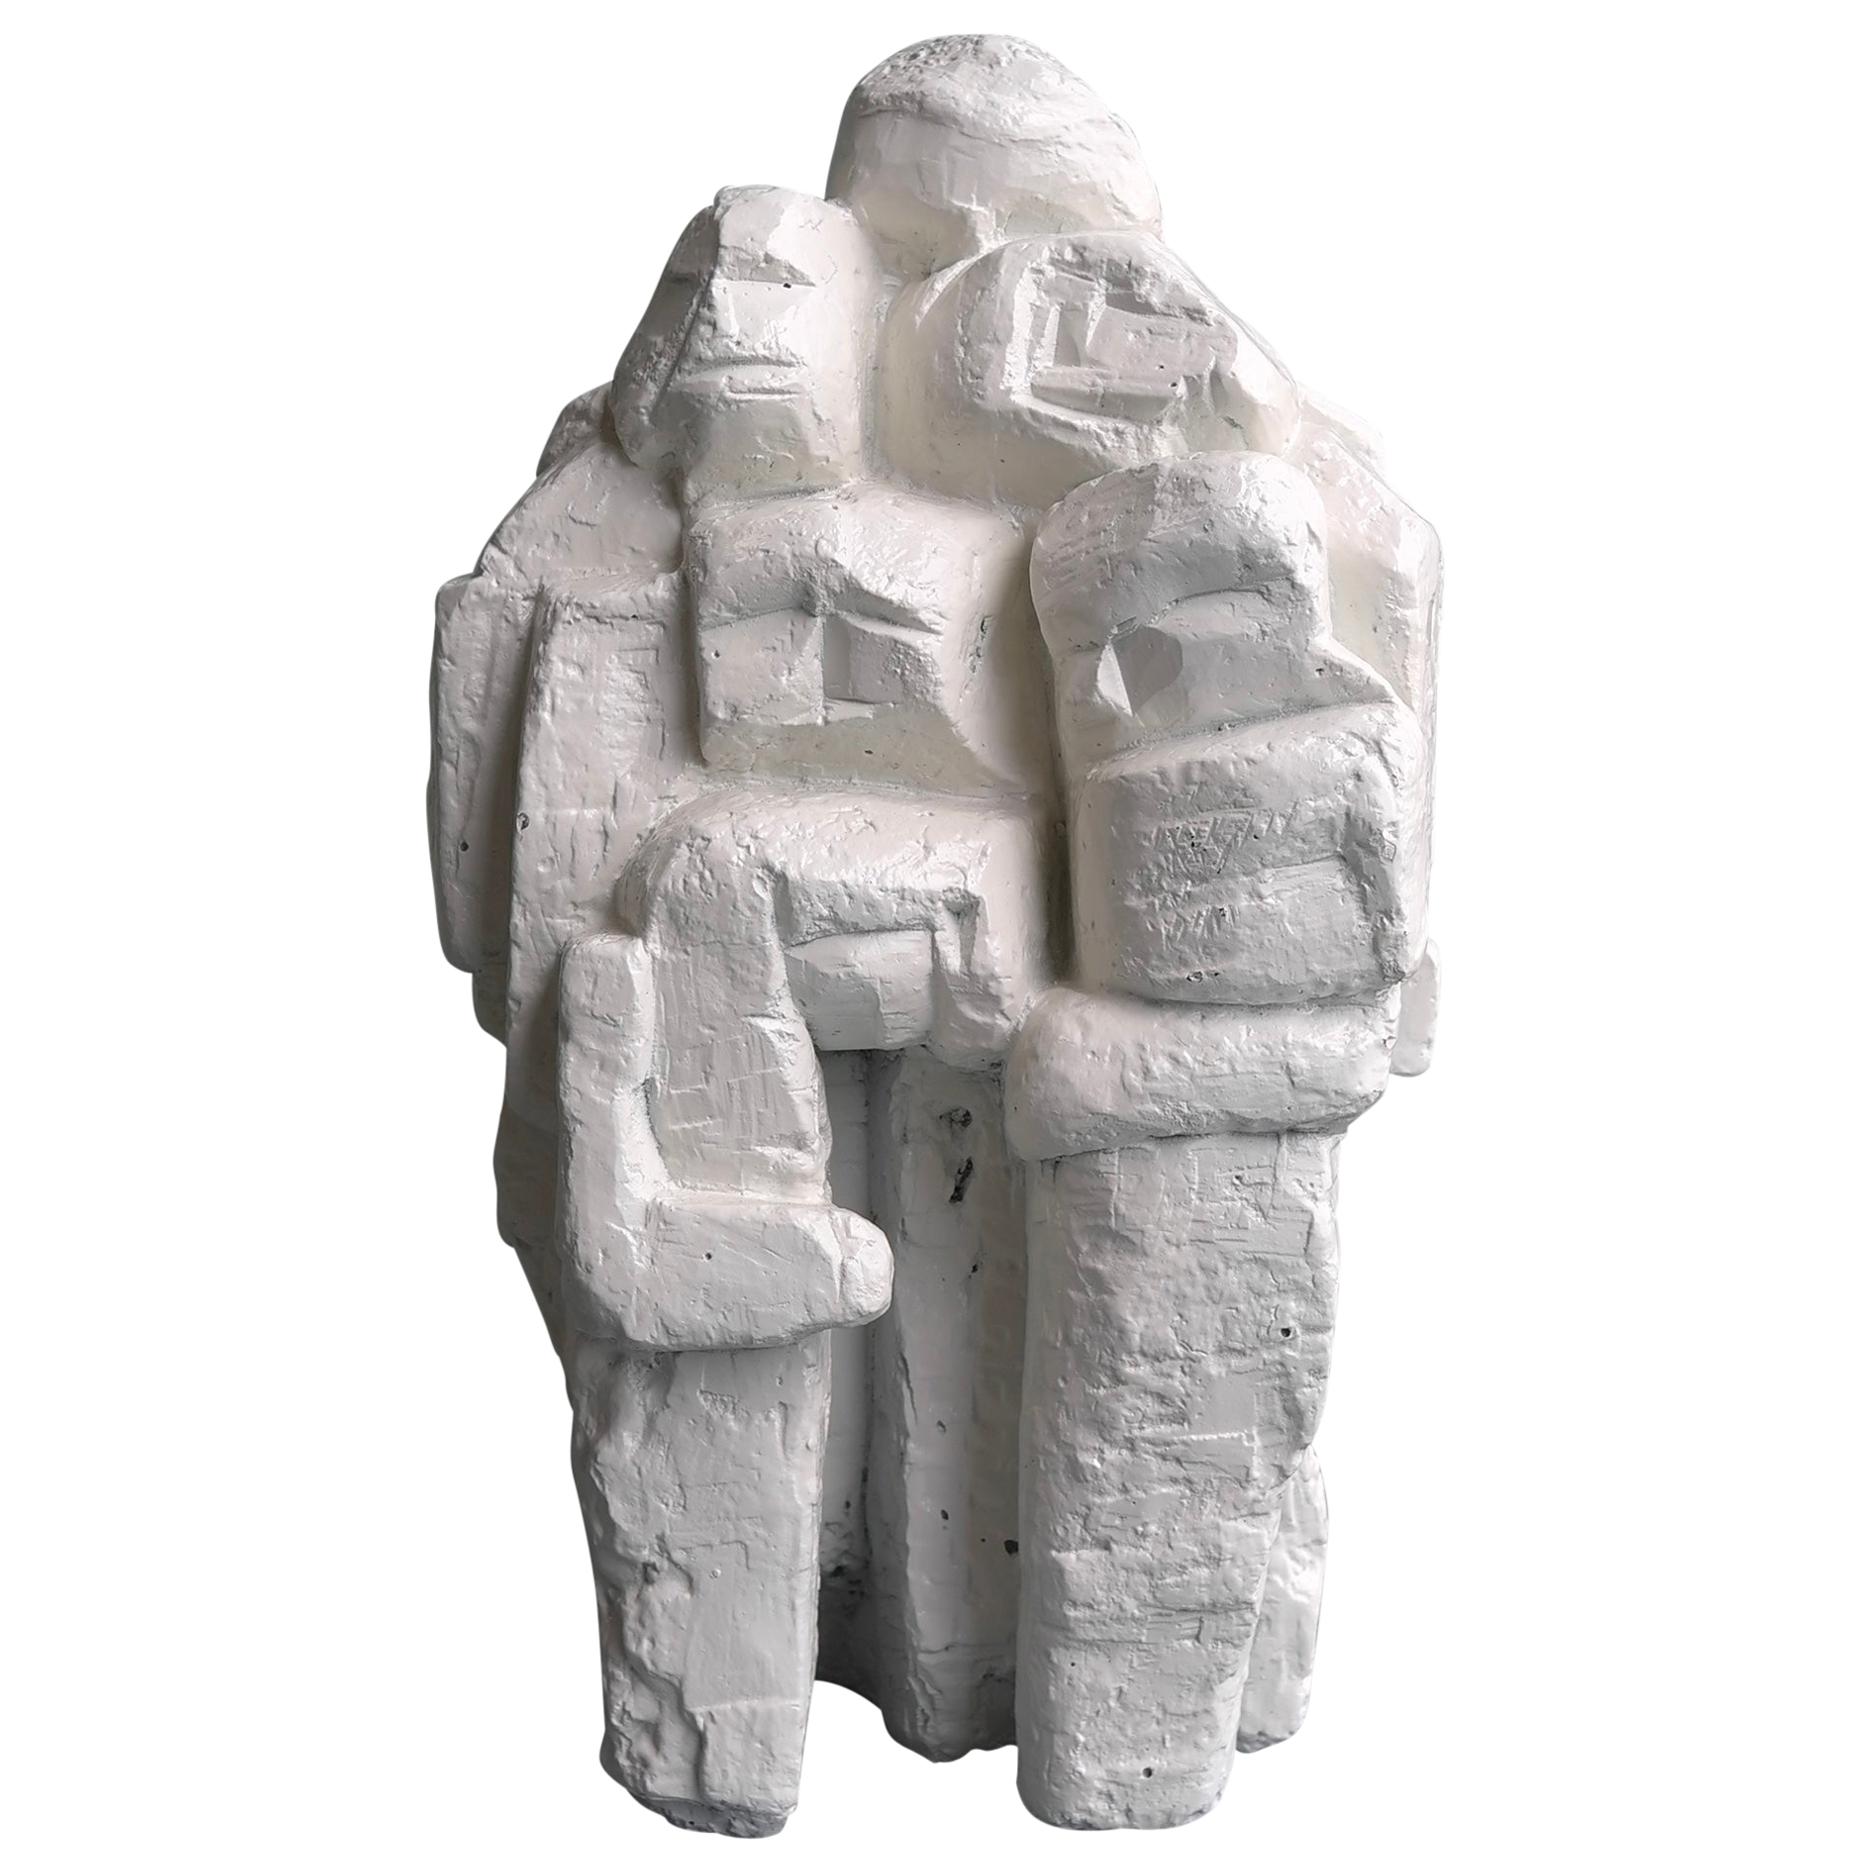 Cubist Decorative White Plaster Sculpture, Group Hug Family, Abstract Art, 1950s